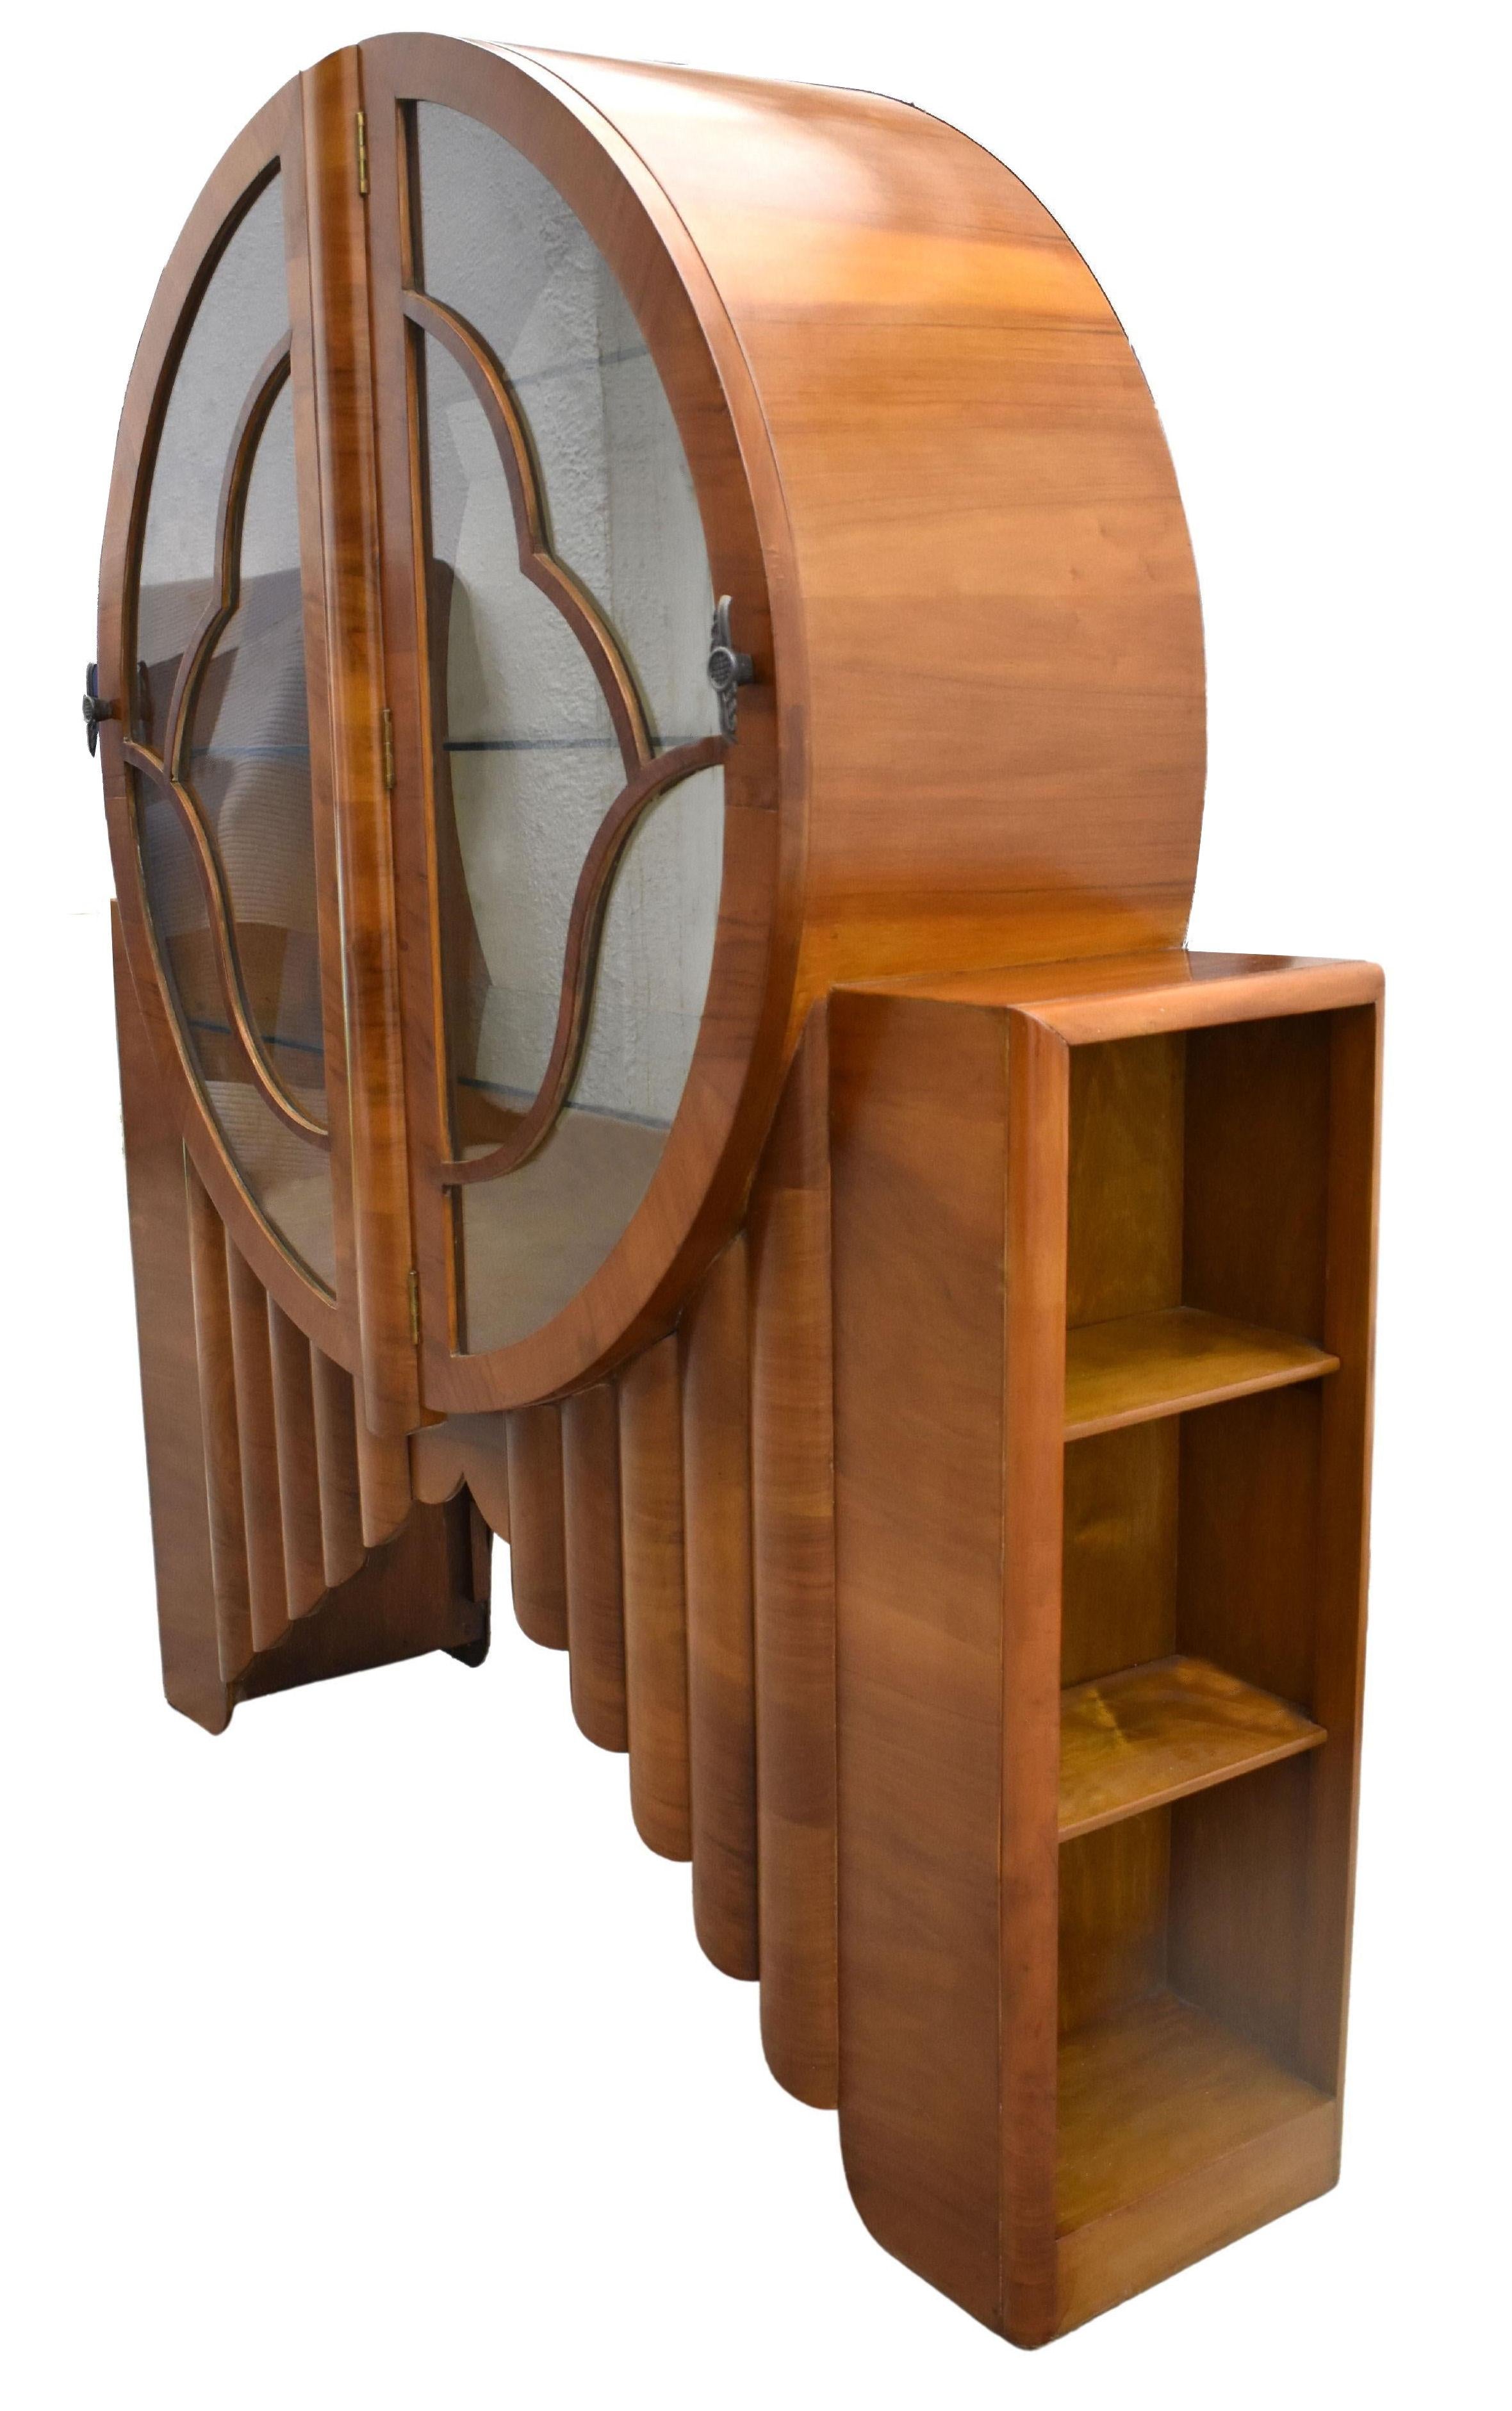 For your consideration is this fabulous and iconic Art Deco 'Rocket Cabinet' made in the 1930's and in veneered in a lovely mid tone walnut. Extremely hard to source and even harder to locate in decent condition, with gorgeous colouring. This